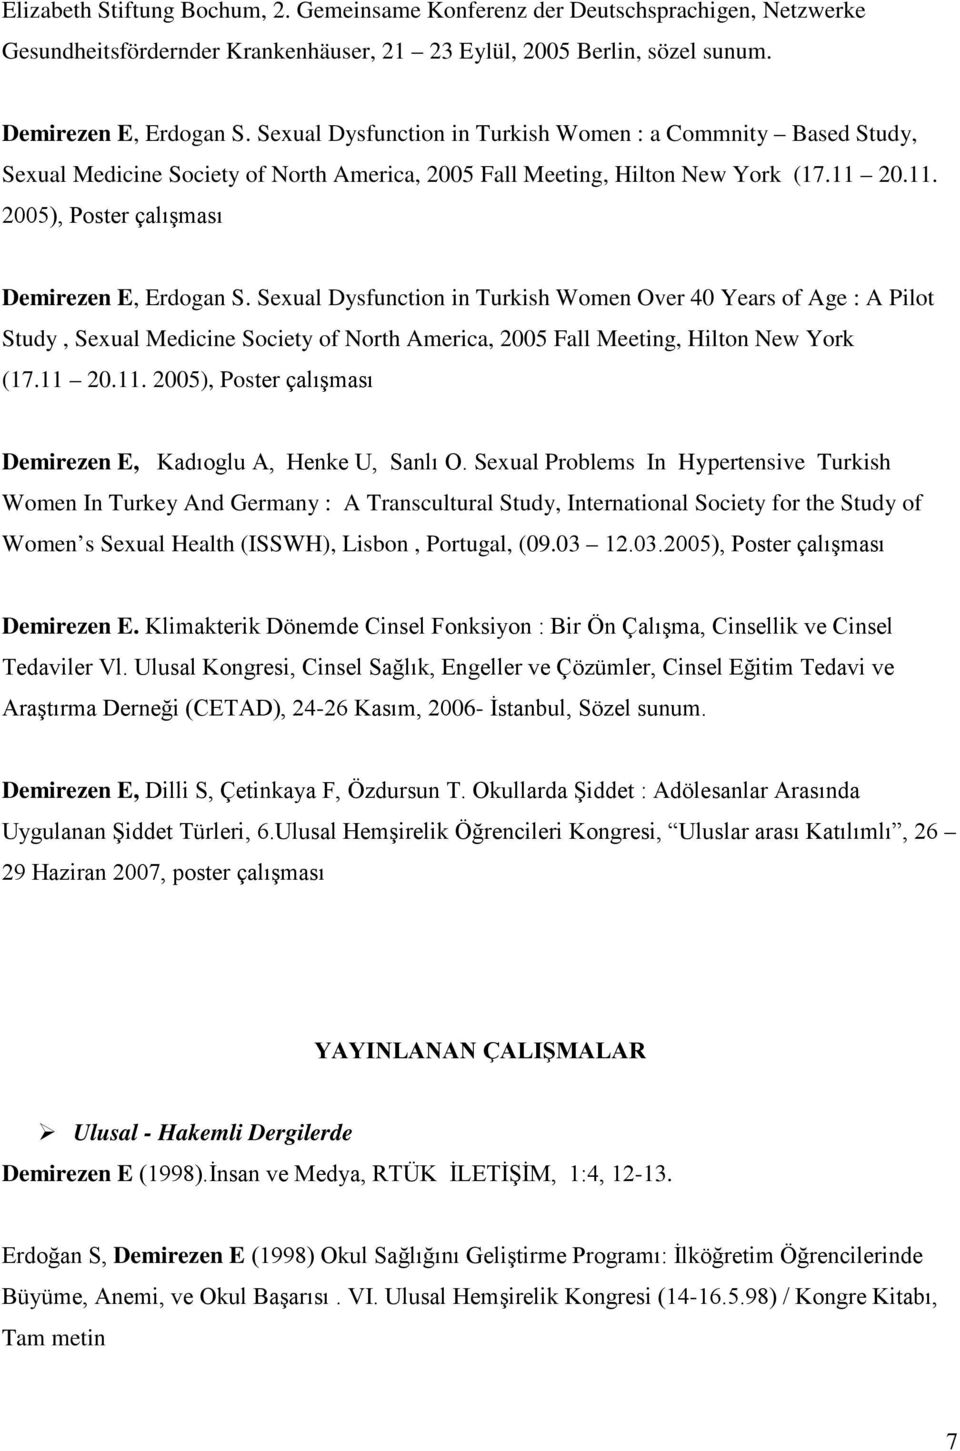 Sexual Dysfunction in Turkish Women Over 40 Years of Age : A Pilot Study, Sexual Medicine Society of North America, 2005 Fall Meeting, Hilton New York (17.11 